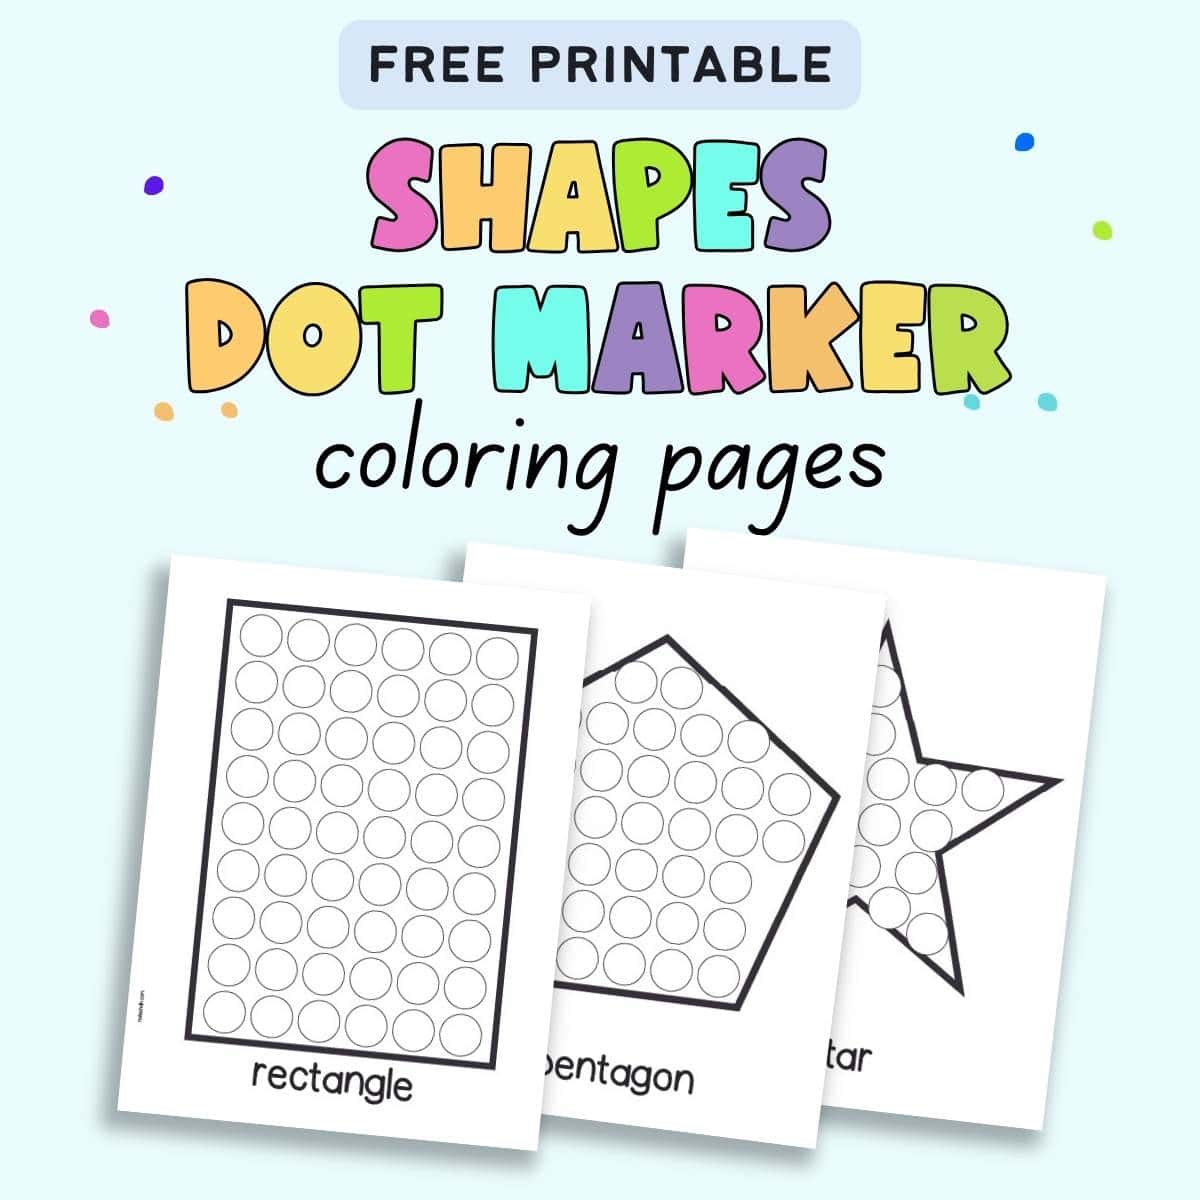 Text "free printable shapes dot marker coloring pages" with pages showing a rectangle, a pentagon, and a star.